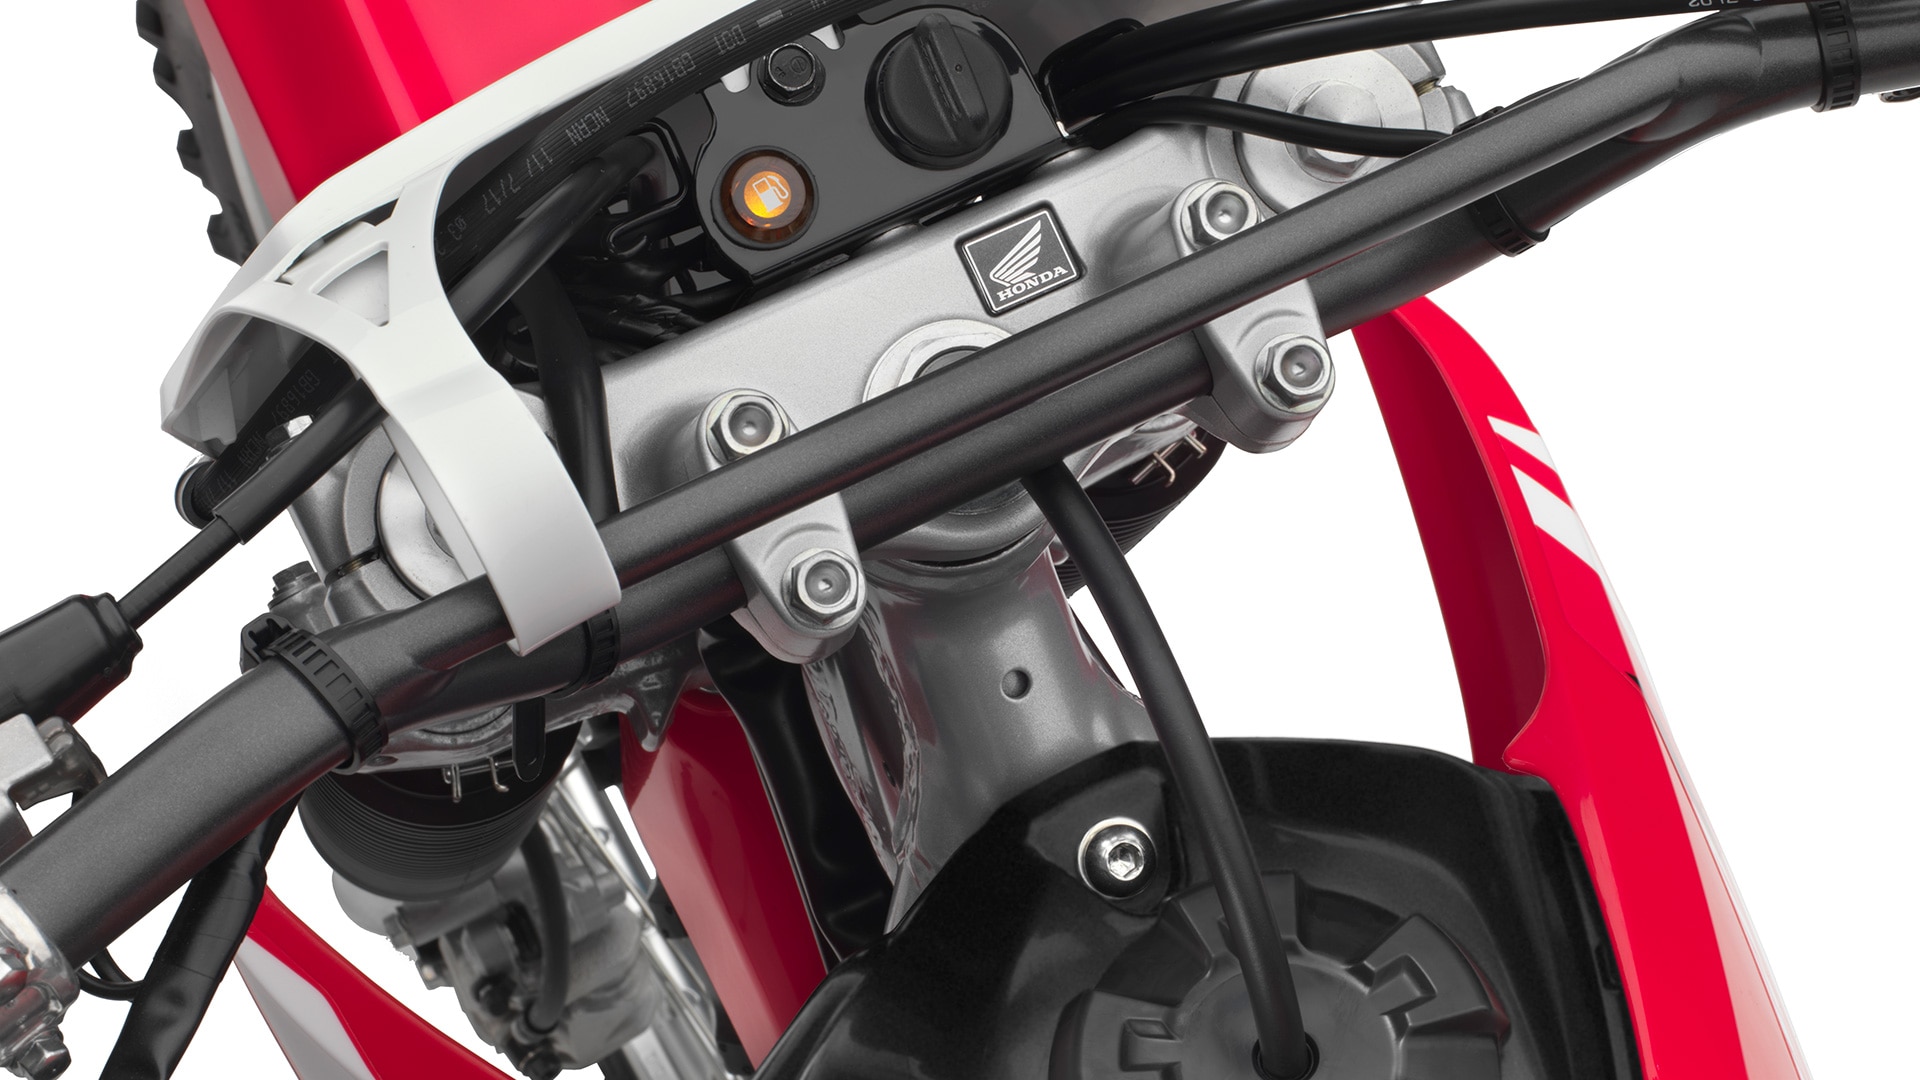 Close-up of CRF250F low fuel and ignition LED indicator lights.